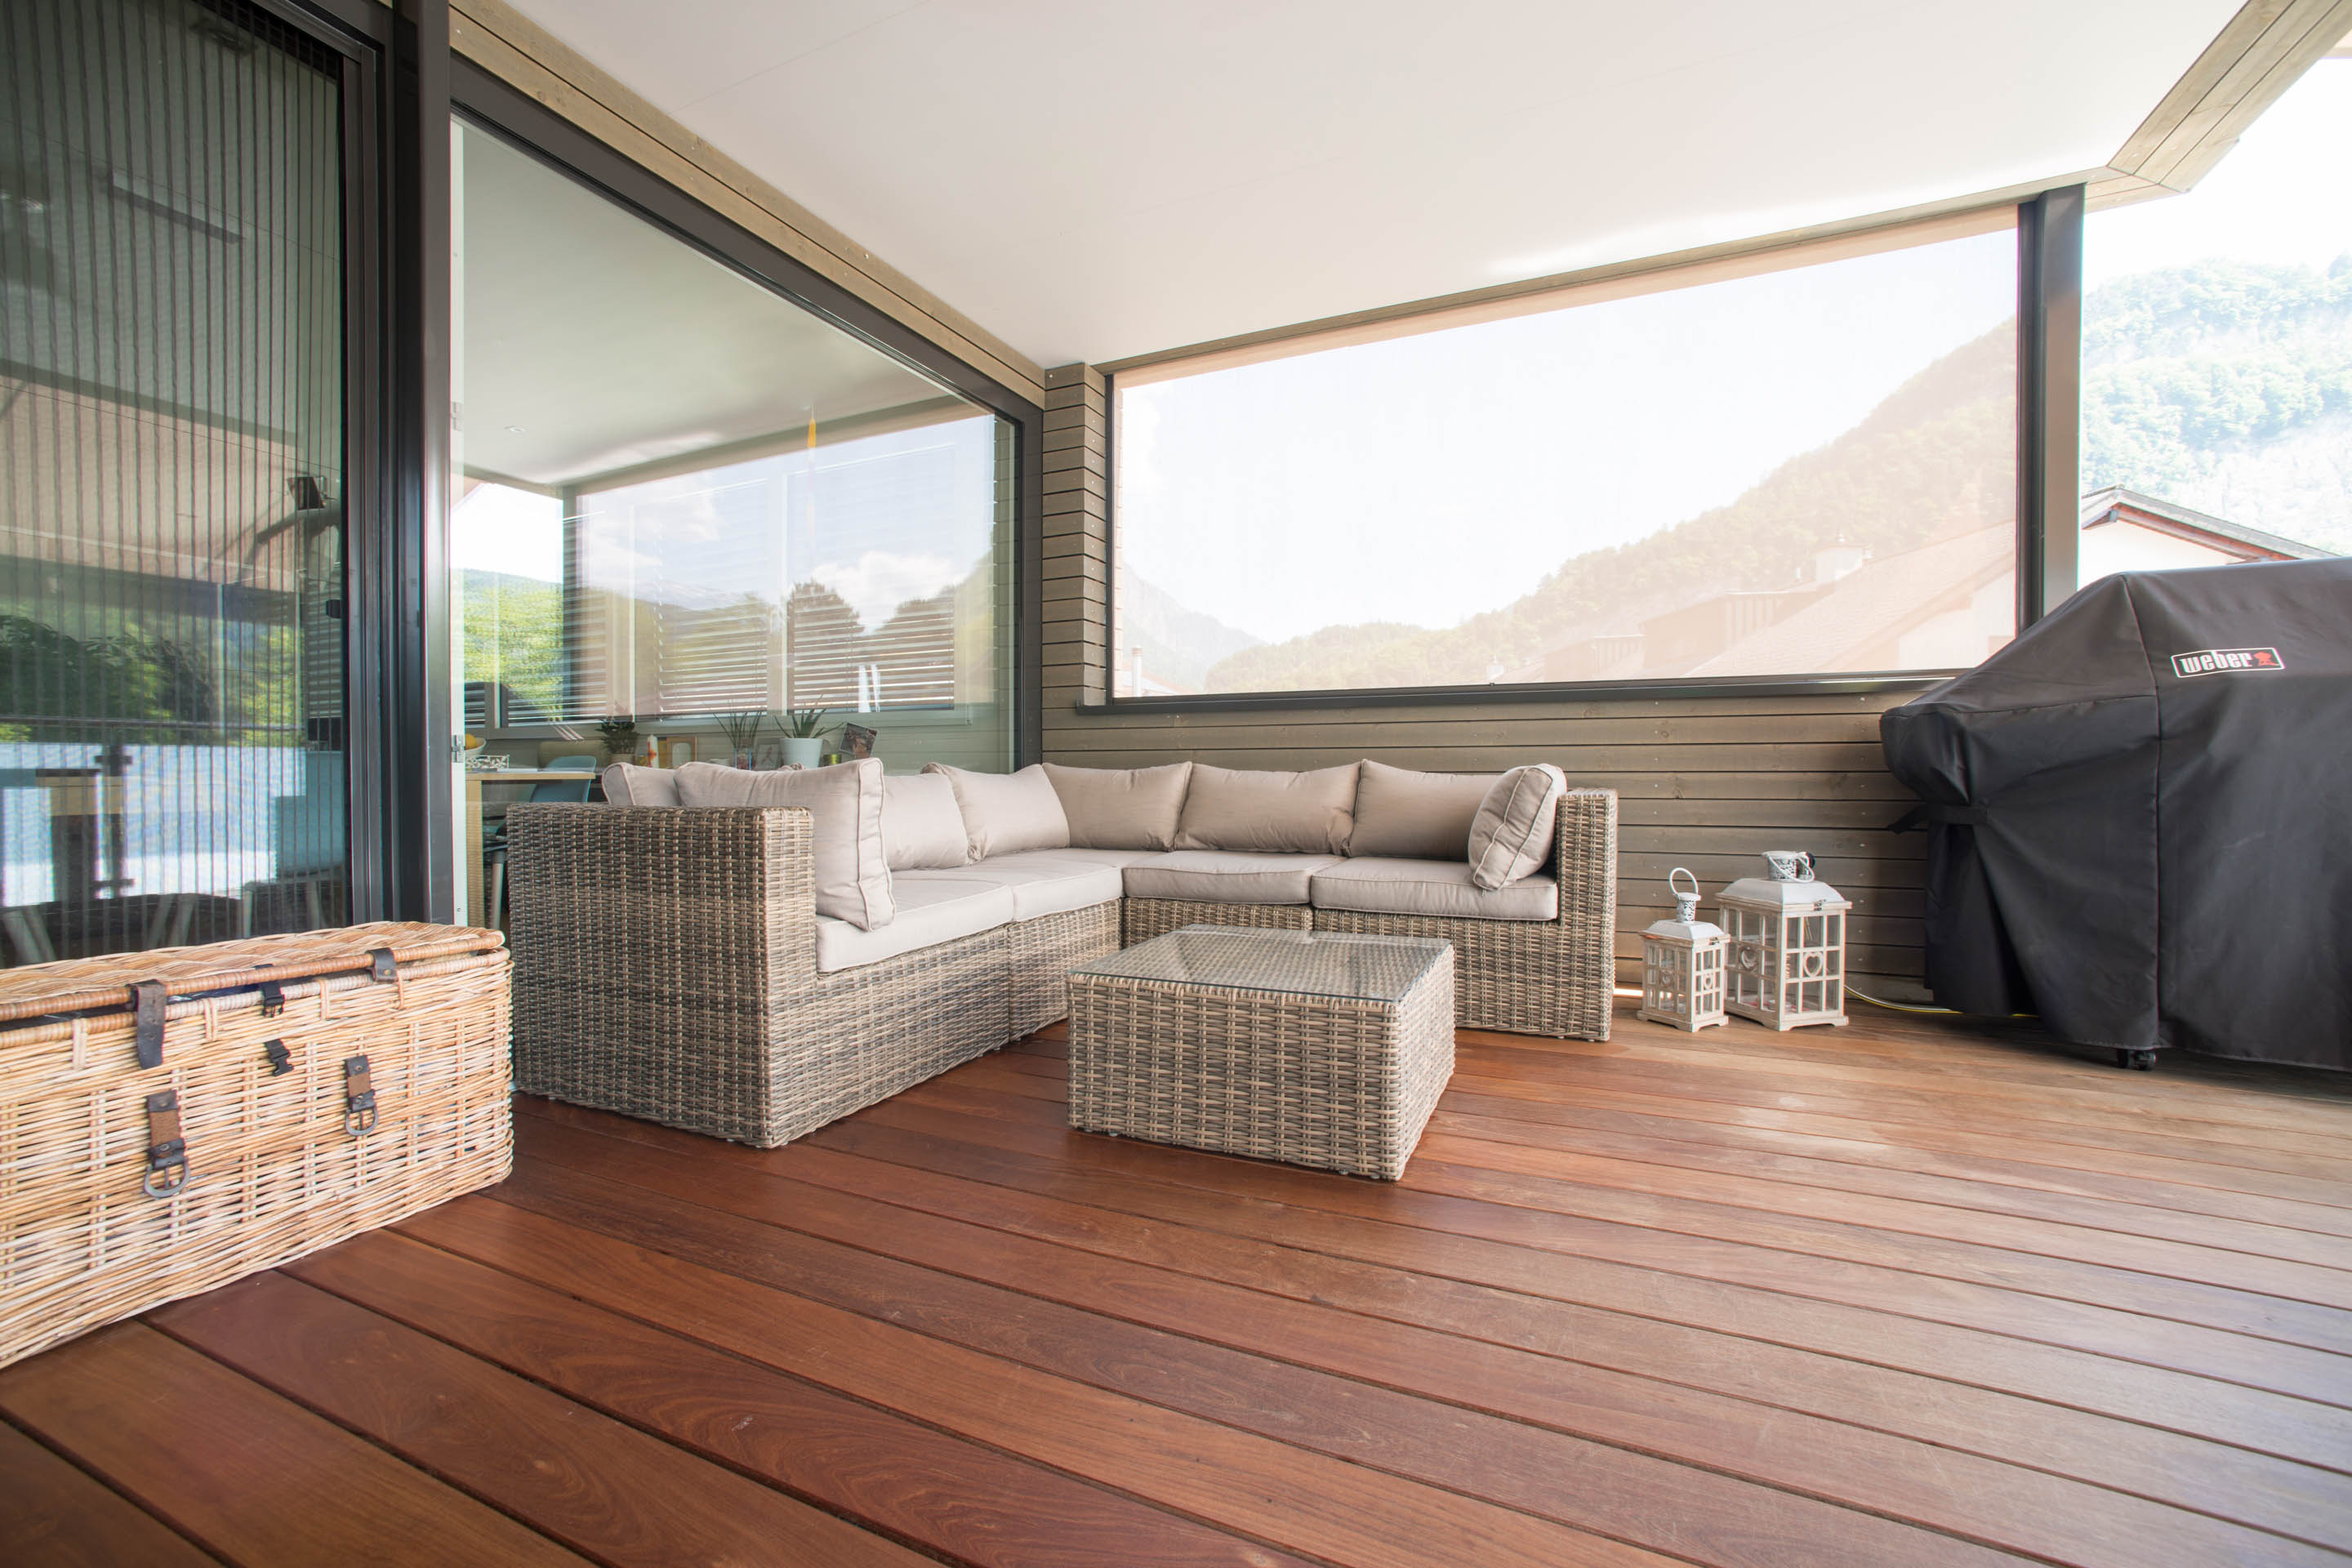 PRIVATE HOUSE | Wooden decking boards Ipé naturally oiled invisible fixed